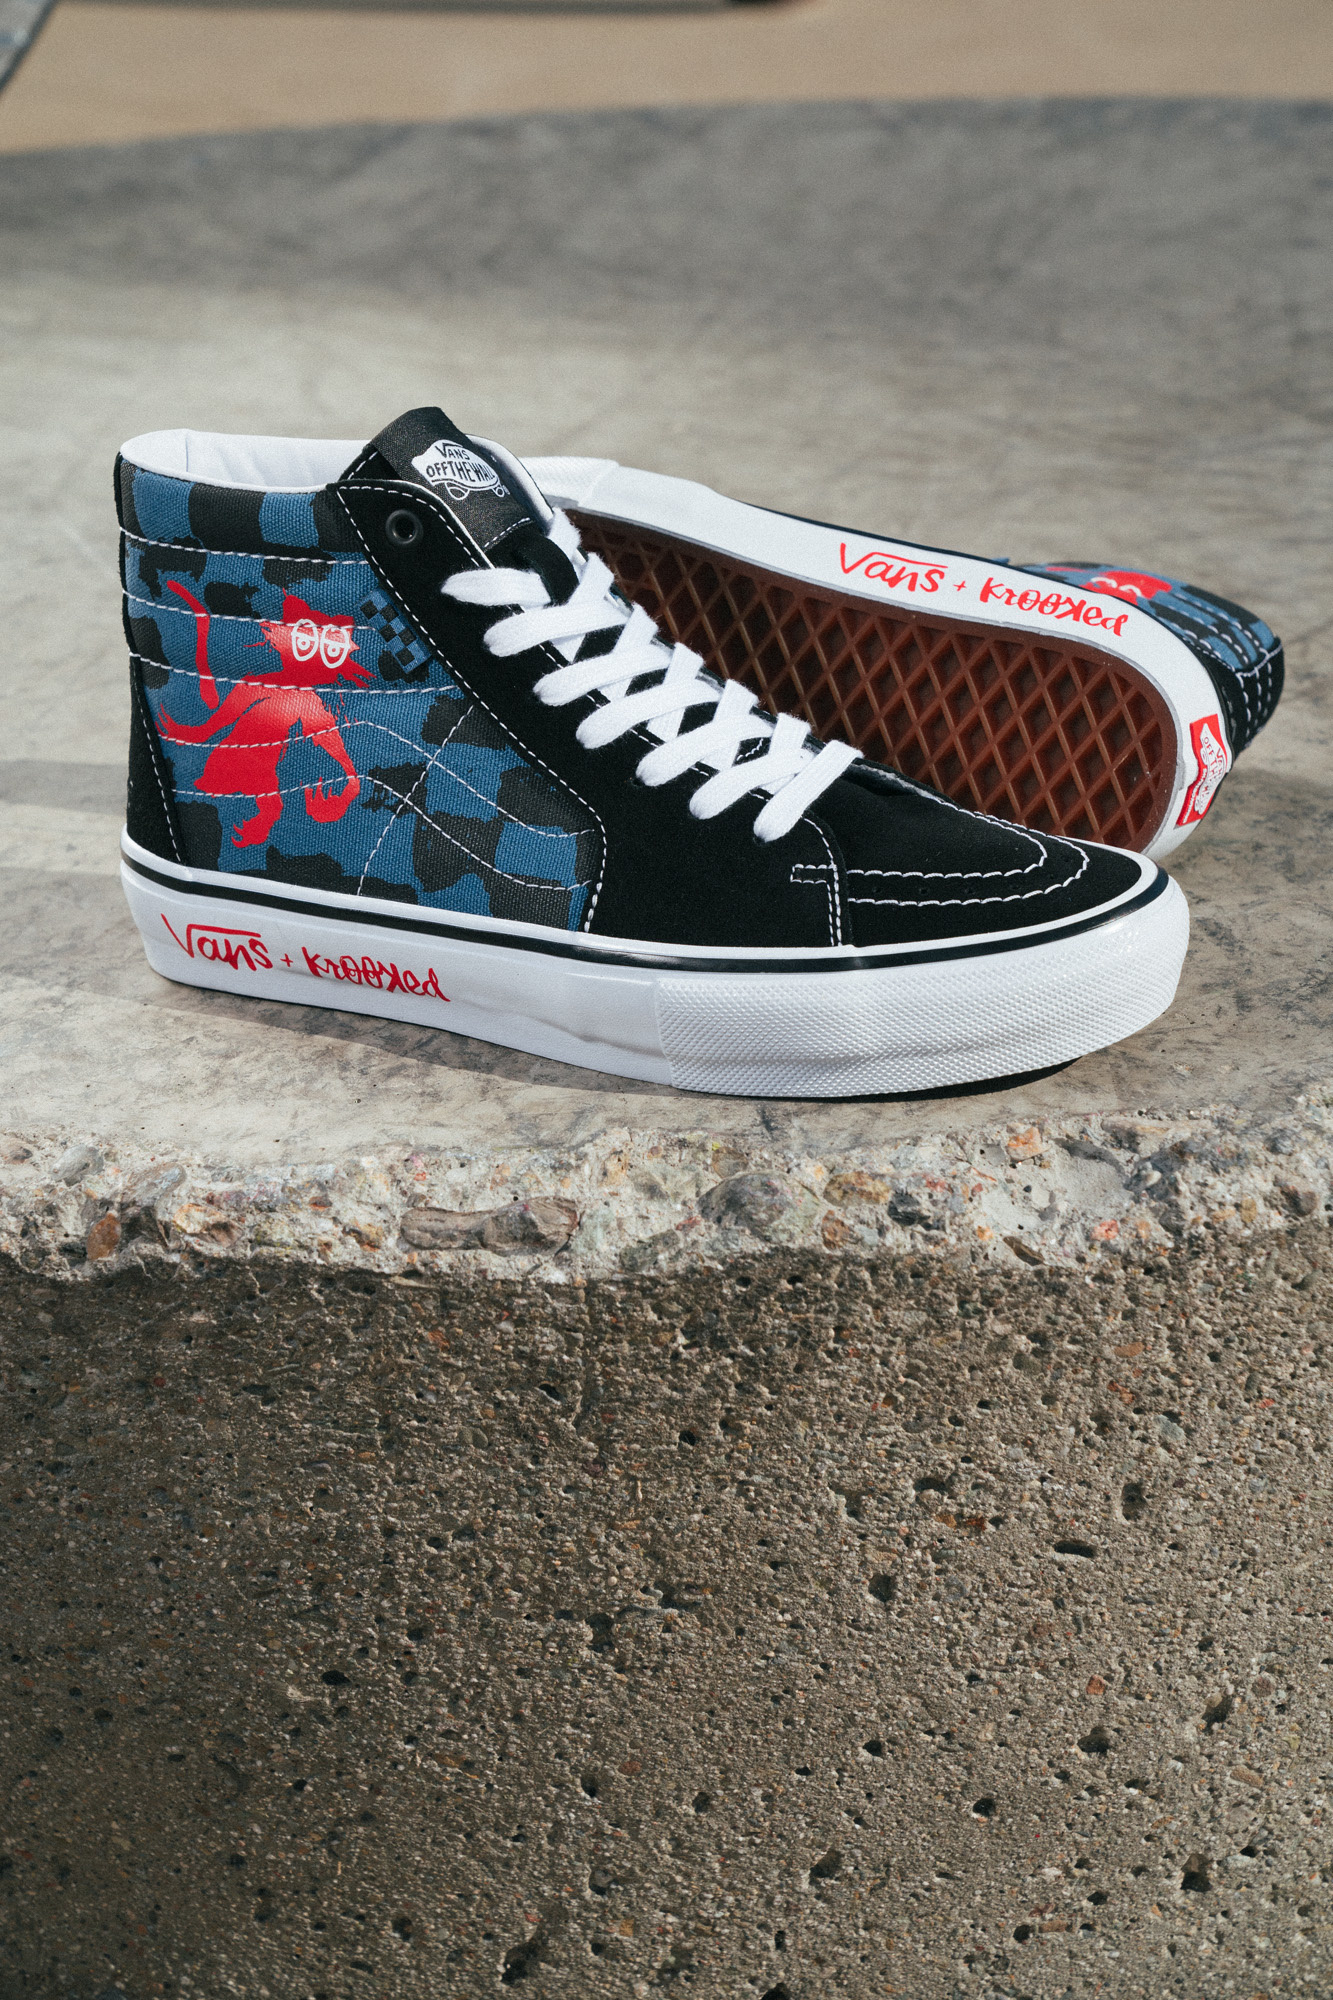 Vans Shoes x Krooked Skateboarding for Ray Barbee by Natas - Shredz Shop